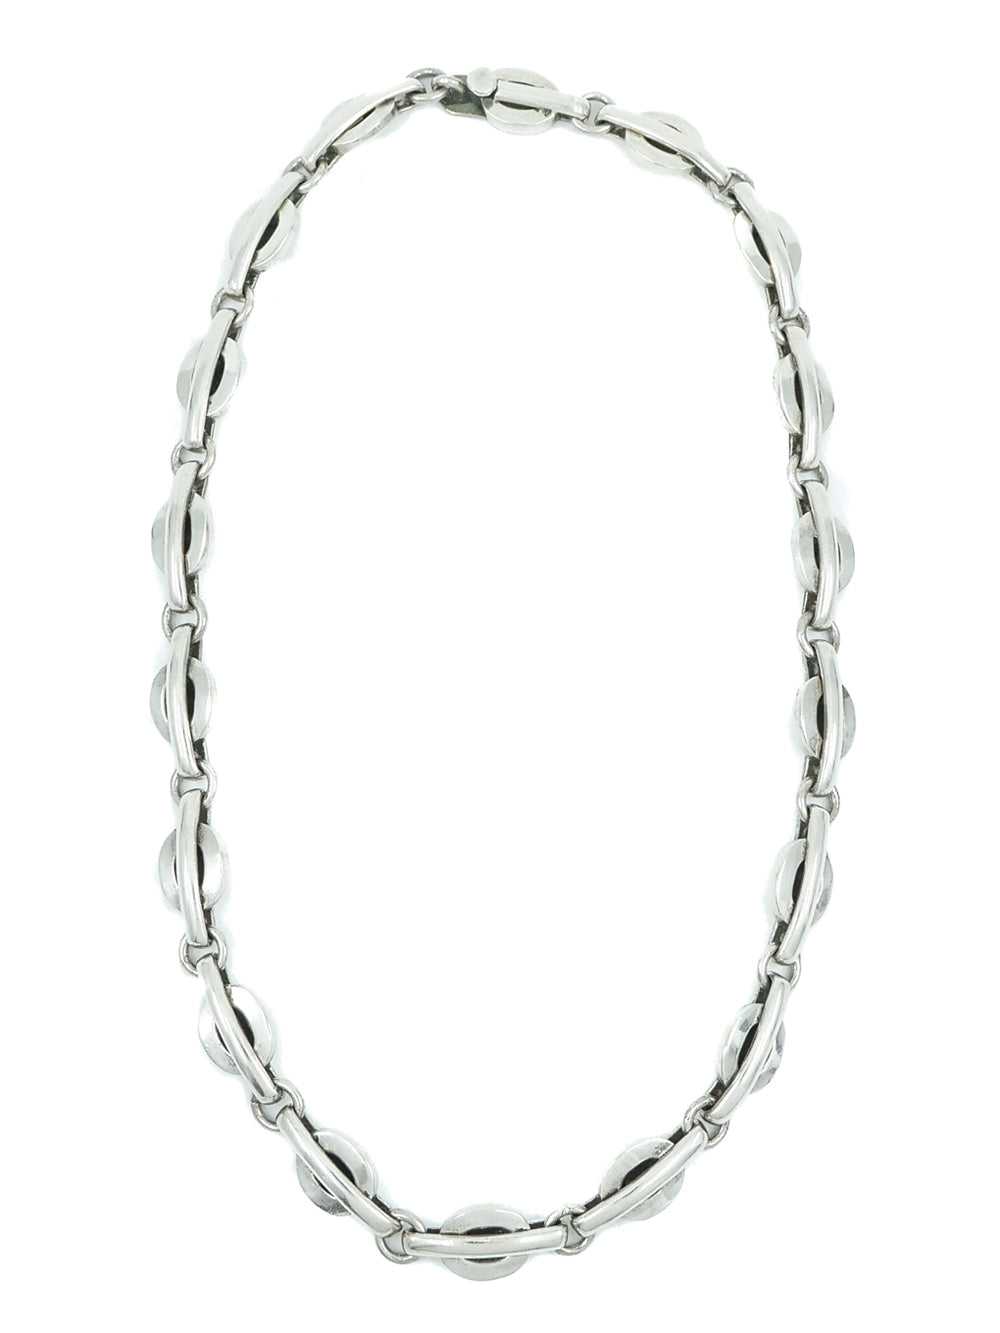 Mexican Sterling Oval and Bar Link Necklace - image 1